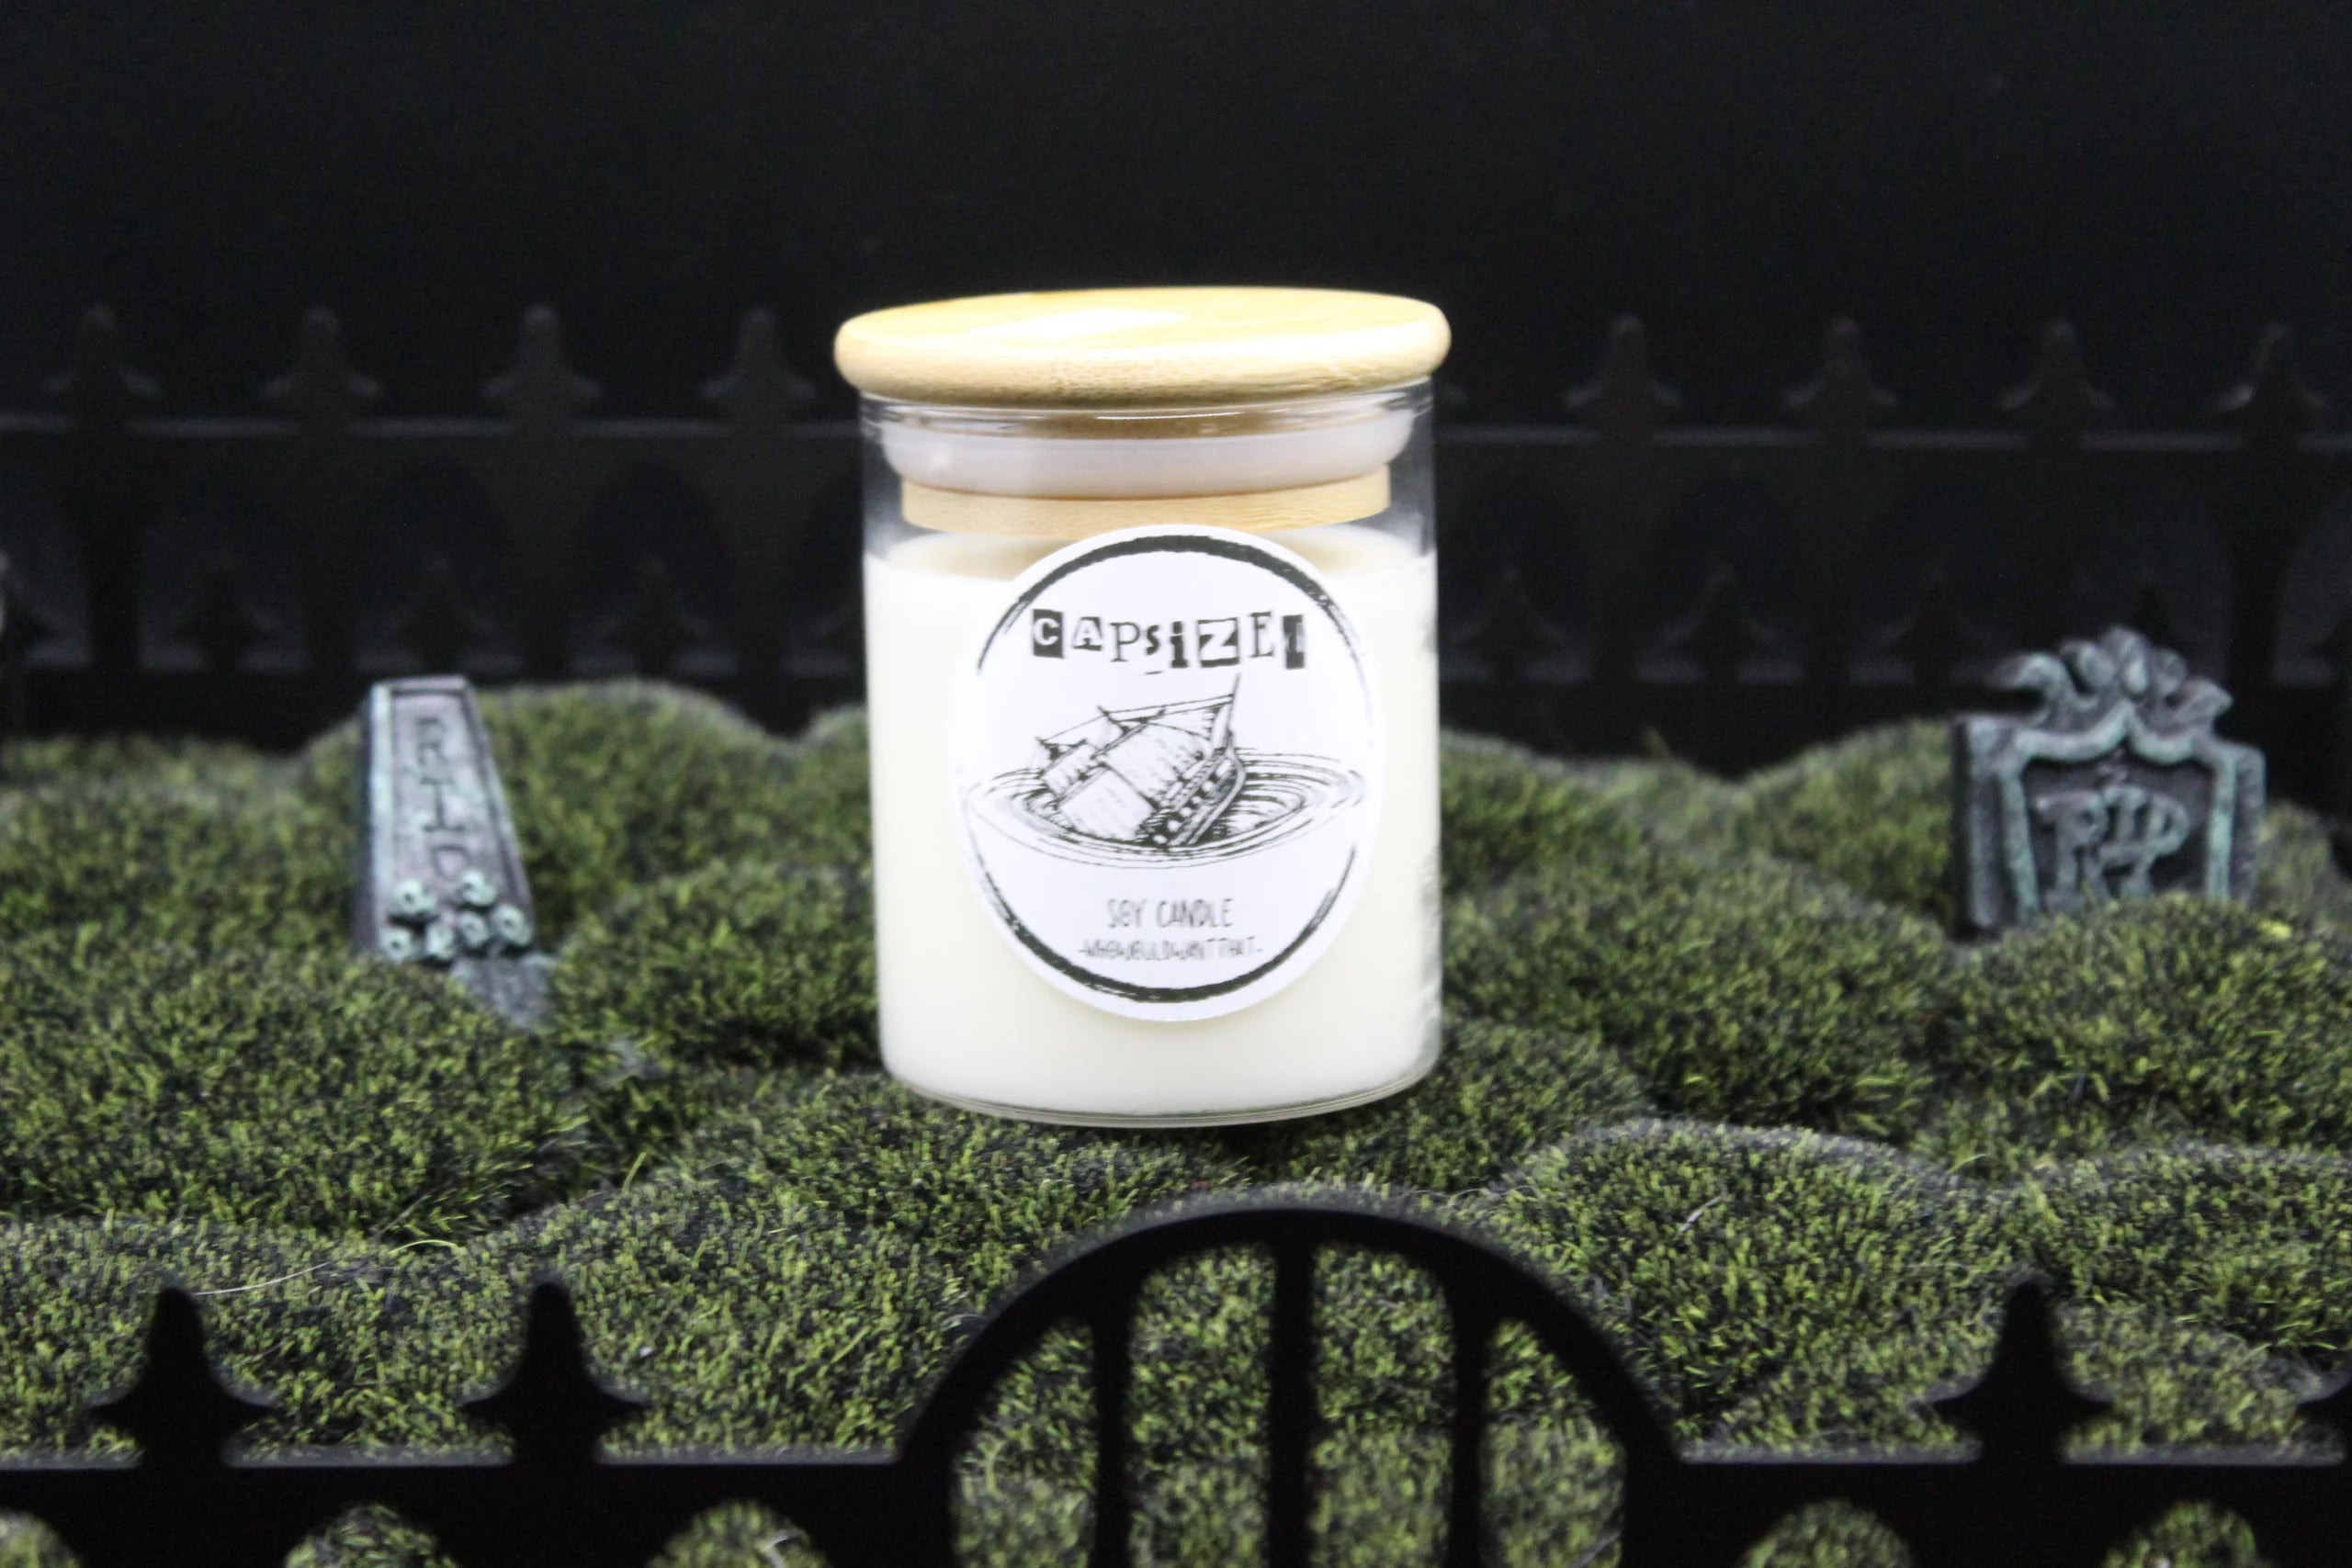 Capsized Candle - 8 oz Scented Soy Candle - Who Would Want That